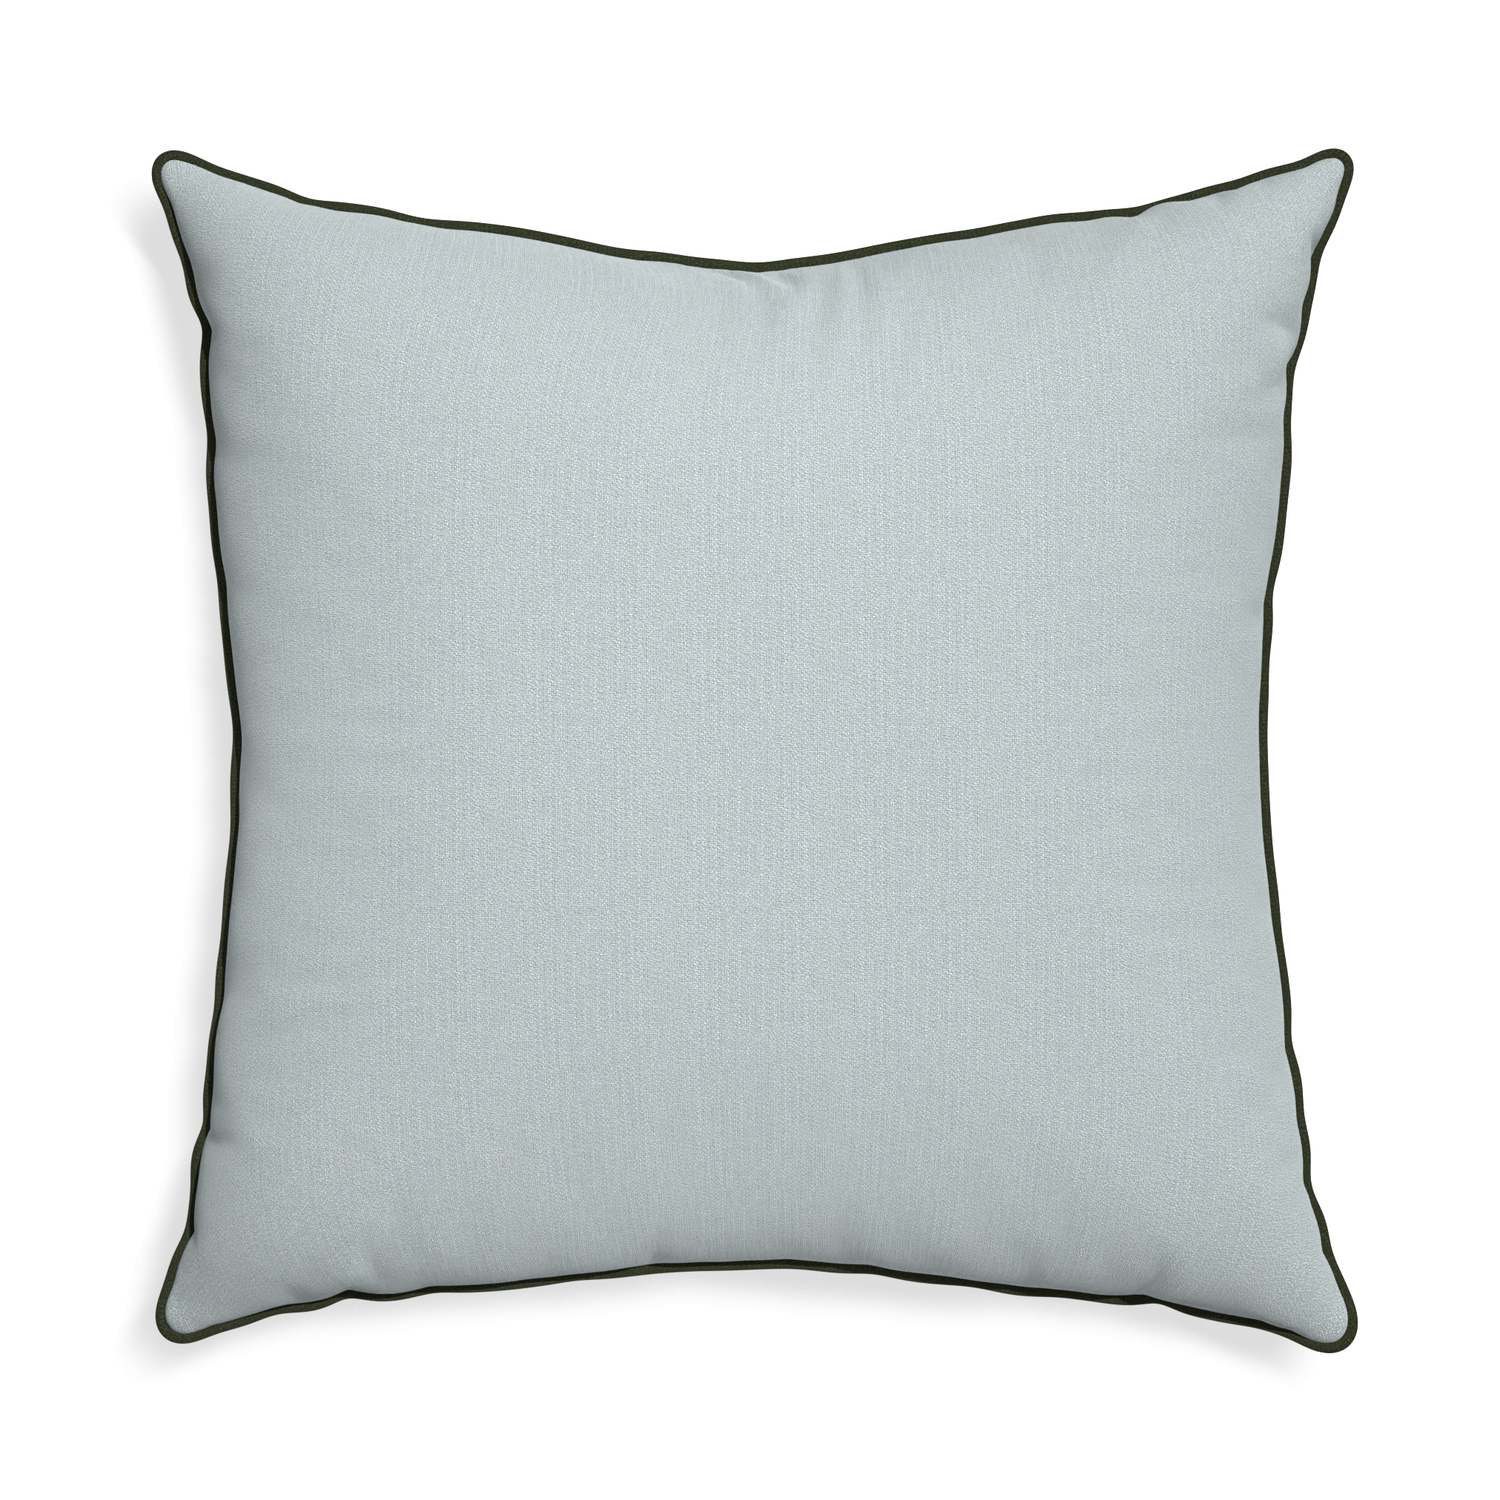 Euro-sham sea custom grey bluepillow with f piping on white background